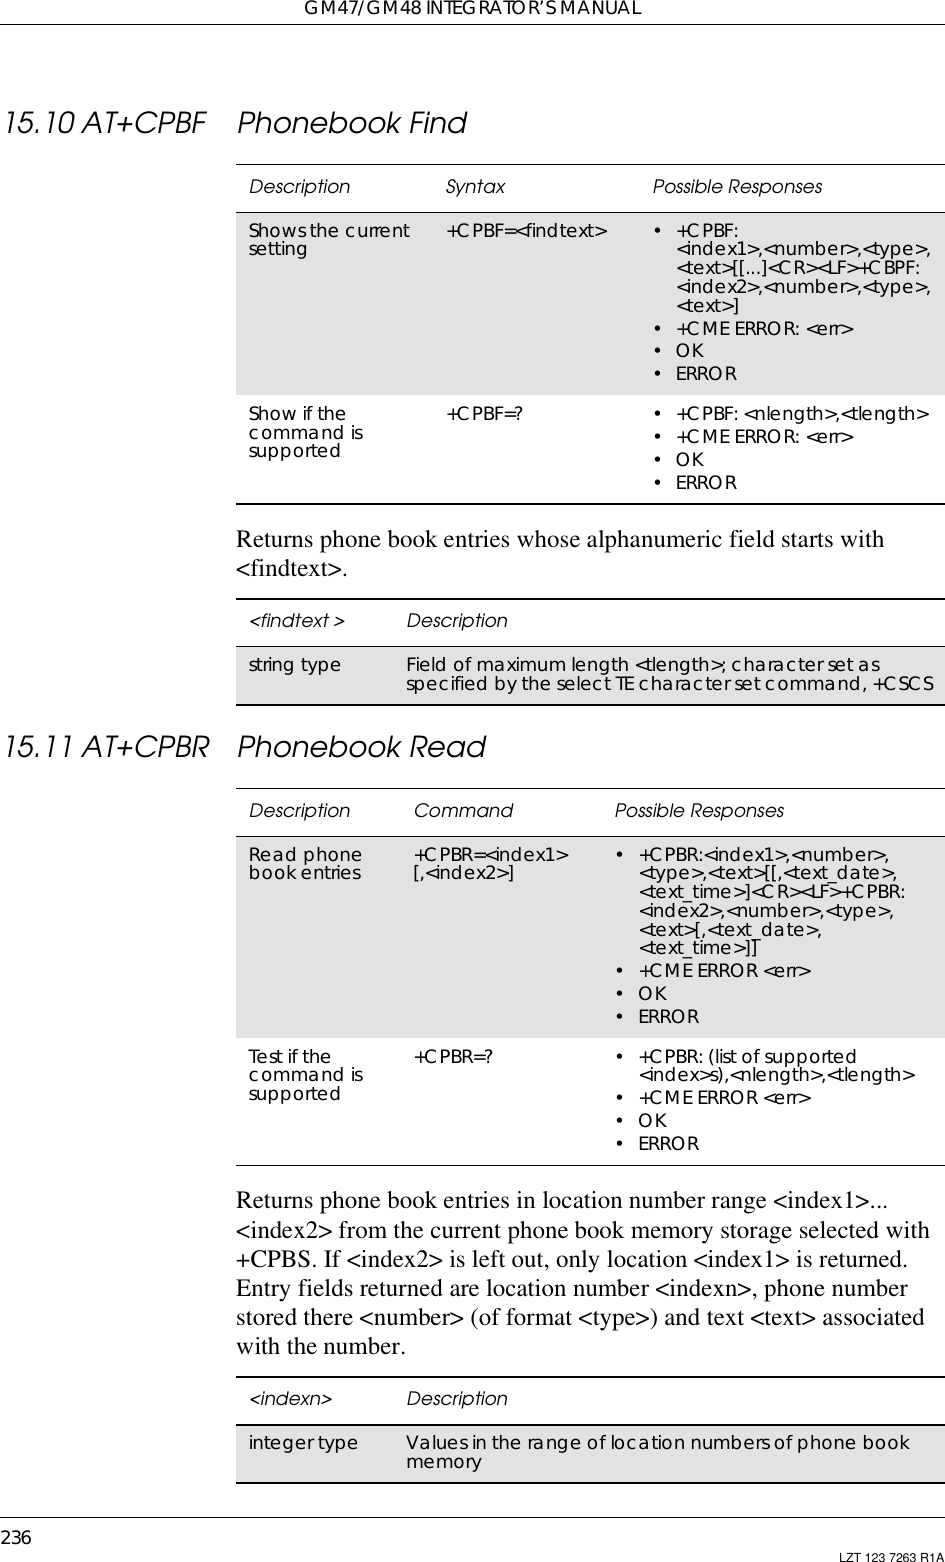 GM47/GM48 INTEGRATOR’S MANUAL236 LZT 123 7263 R1A15.10 AT+CPBF Phonebook FindReturns phone book entries whose alphanumeric field starts with&lt;findtext&gt;.15.11 AT+CPBR Phonebook ReadReturns phone book entries in location number range &lt;index1&gt;...&lt;index2&gt; from the current phone book memory storage selected with+CPBS. If &lt;index2&gt; is left out, only location &lt;index1&gt; is returned.Entry fields returned are location number &lt;indexn&gt;, phone numberstored there &lt;number&gt; (of format &lt;type&gt;) and text &lt;text&gt; associatedwith the number.Description Syntax Possible ResponsesShows the currentsetting +CPBF=&lt;findtext&gt; •+CPBF:&lt;index1&gt;,&lt;number&gt;,&lt;type&gt;,&lt;text&gt;[[...]&lt;CR&gt;&lt;LF&gt;+CBPF:&lt;index2&gt;,&lt;number&gt;,&lt;type&gt;,&lt;text&gt;]•+CMEERROR:&lt;err&gt;•OK•ERRORShow if thecommand issupported+CPBF=? • +CPBF: &lt;nlength&gt;,&lt;tlength&gt;•+CMEERROR:&lt;err&gt;•OK•ERROR&lt;findtext &gt; Descriptionstring type Field of maximum length &lt;tlength&gt;; character set asspecified by the select TE character set command, +CSCSDescription Command Possible ResponsesRead phonebook entries +CPBR=&lt;index1&gt;[,&lt;index2&gt;] • +CPBR:&lt;index1&gt;,&lt;number&gt;,&lt;type&gt;,&lt;text&gt;[[,&lt;text_date&gt;,&lt;text_time&gt;]&lt;CR&gt;&lt;LF&gt;+CPBR:&lt;index2&gt;,&lt;number&gt;,&lt;type&gt;,&lt;text&gt;[,&lt;text_date&gt;,&lt;text_time&gt;]]• +CME ERROR &lt;err&gt;•OK• ERRORTest if thecommand issupported+CPBR=? • +CPBR: (list of supported&lt;index&gt;s),&lt;nlength&gt;,&lt;tlength&gt;• +CME ERROR &lt;err&gt;•OK• ERROR&lt;indexn&gt; Descriptioninteger type Values in the range of location numbers of phone bookmemory